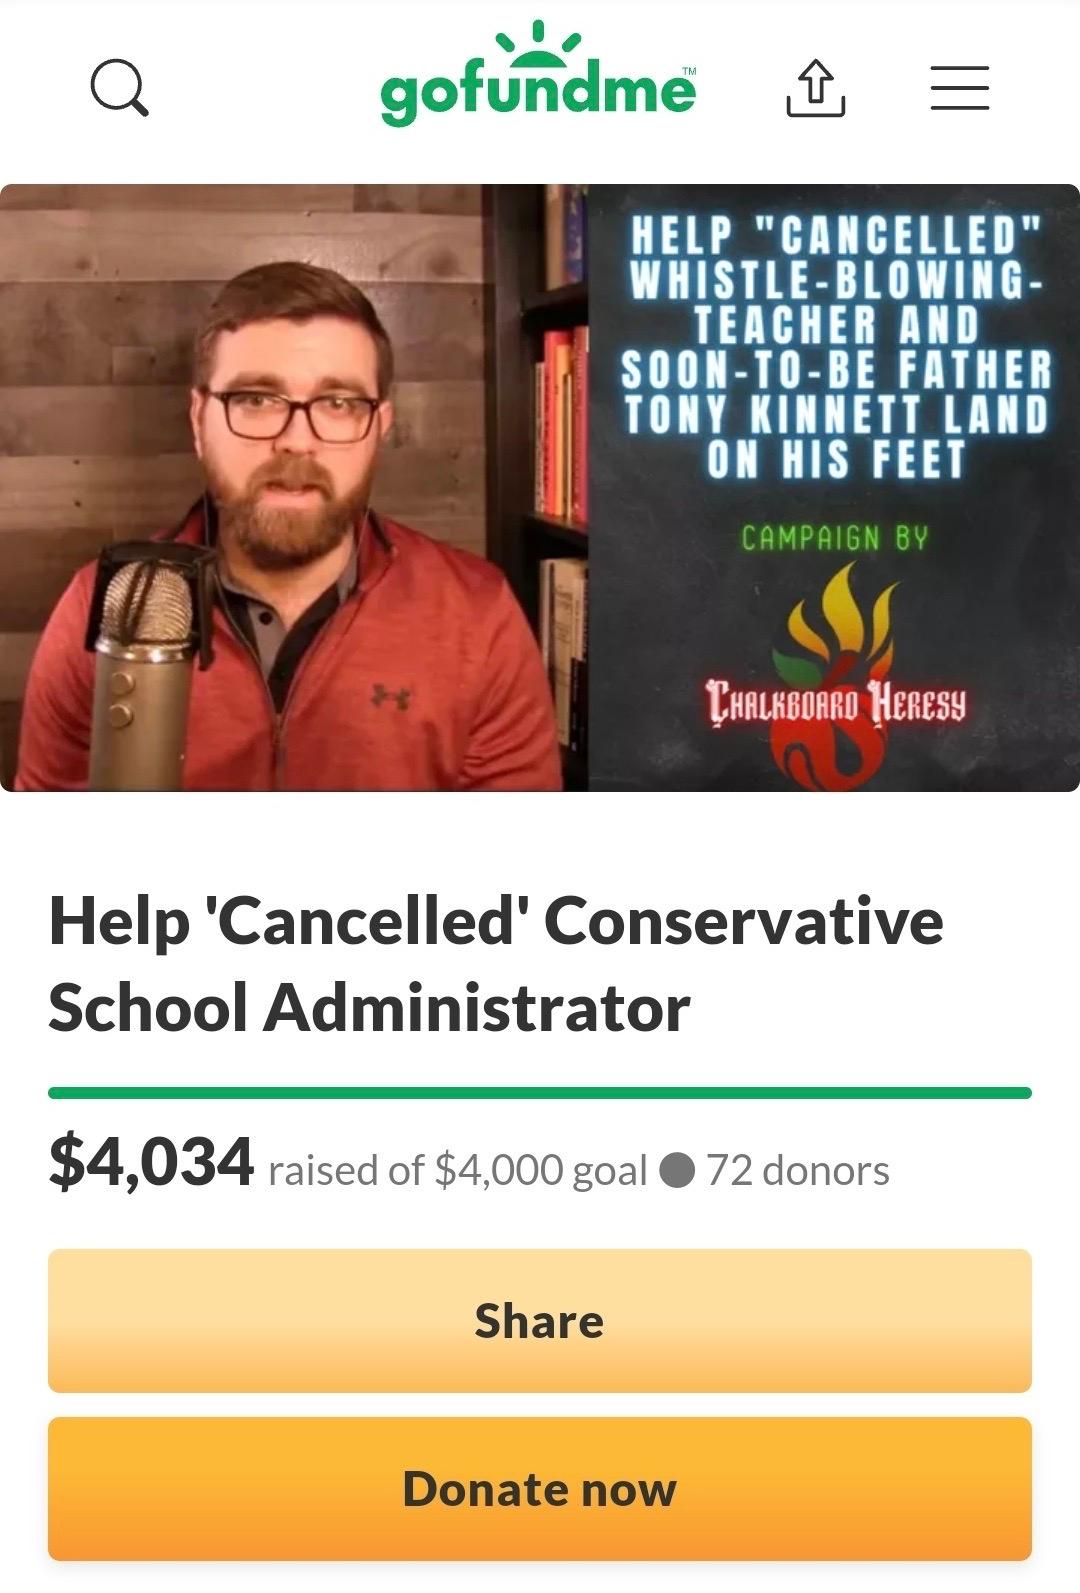 Tony Kinnett's GoFundMe page raised about $5,000 by the end, but he got none of the money raised because the website deleted it. Screenshot. (Photo courtesy of Tony Kinnett)